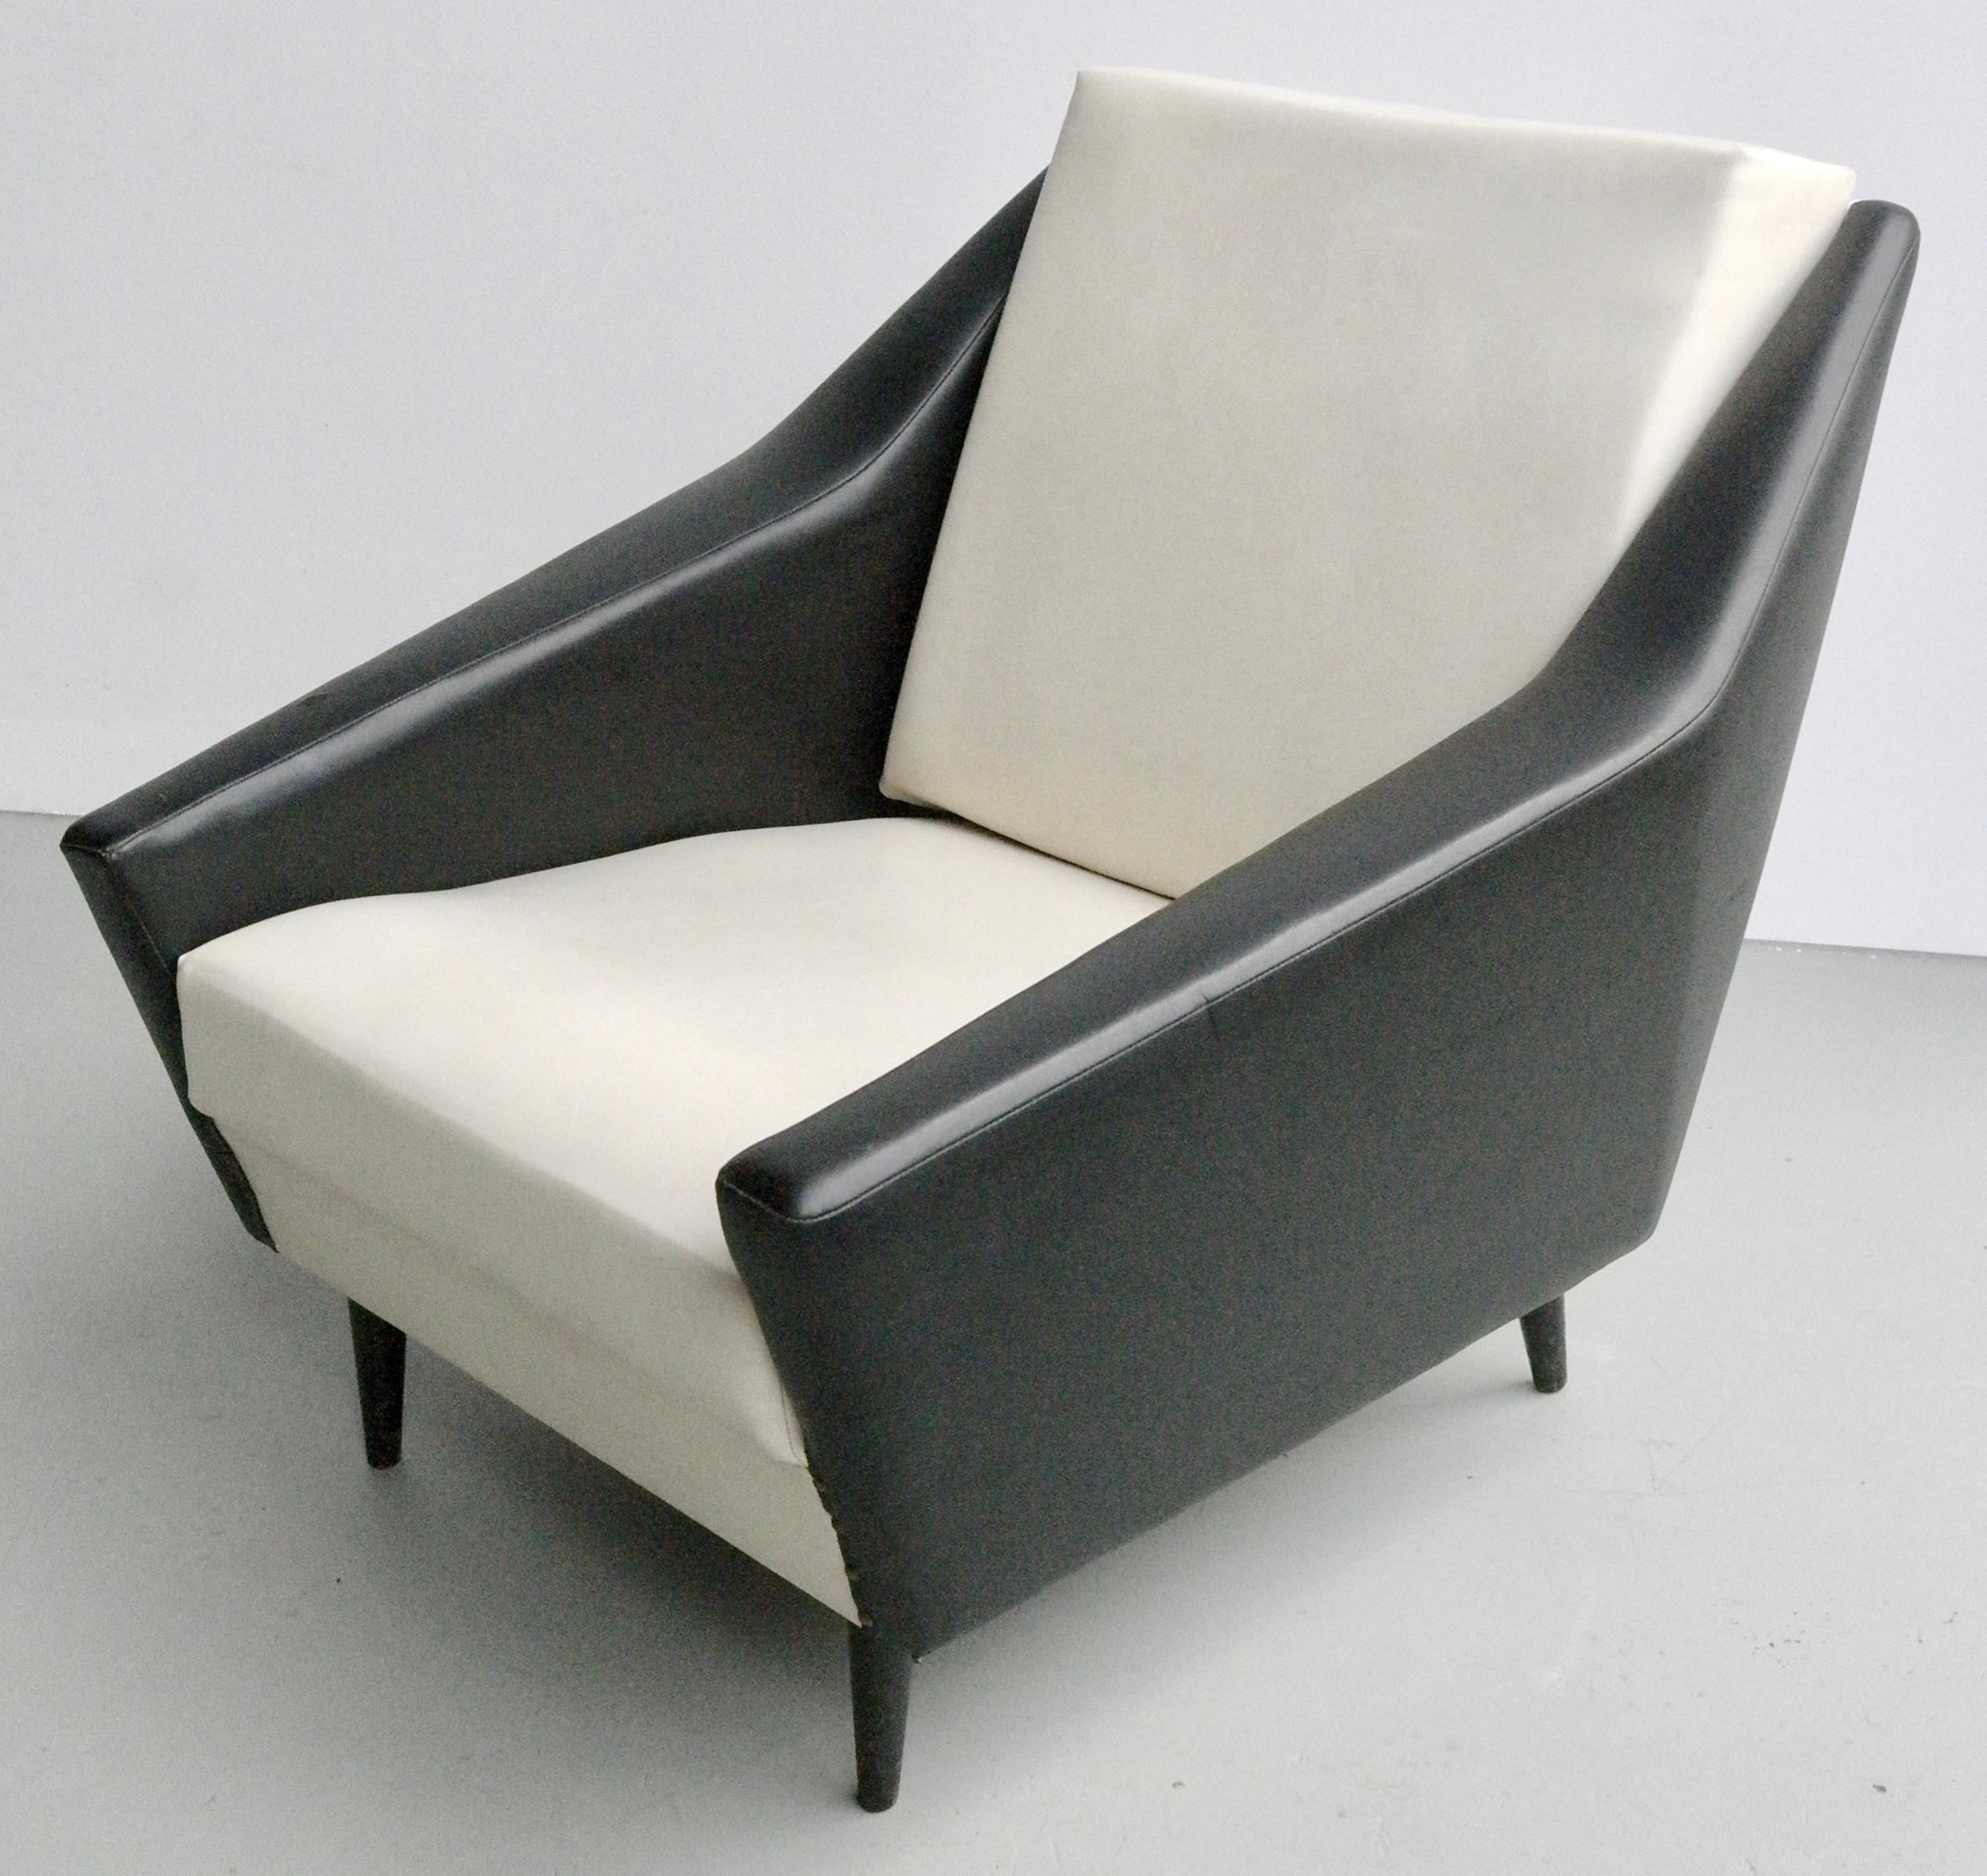 Mid-Century Modern Black and White Distex Style Lounge Chair, Italy, 1950s